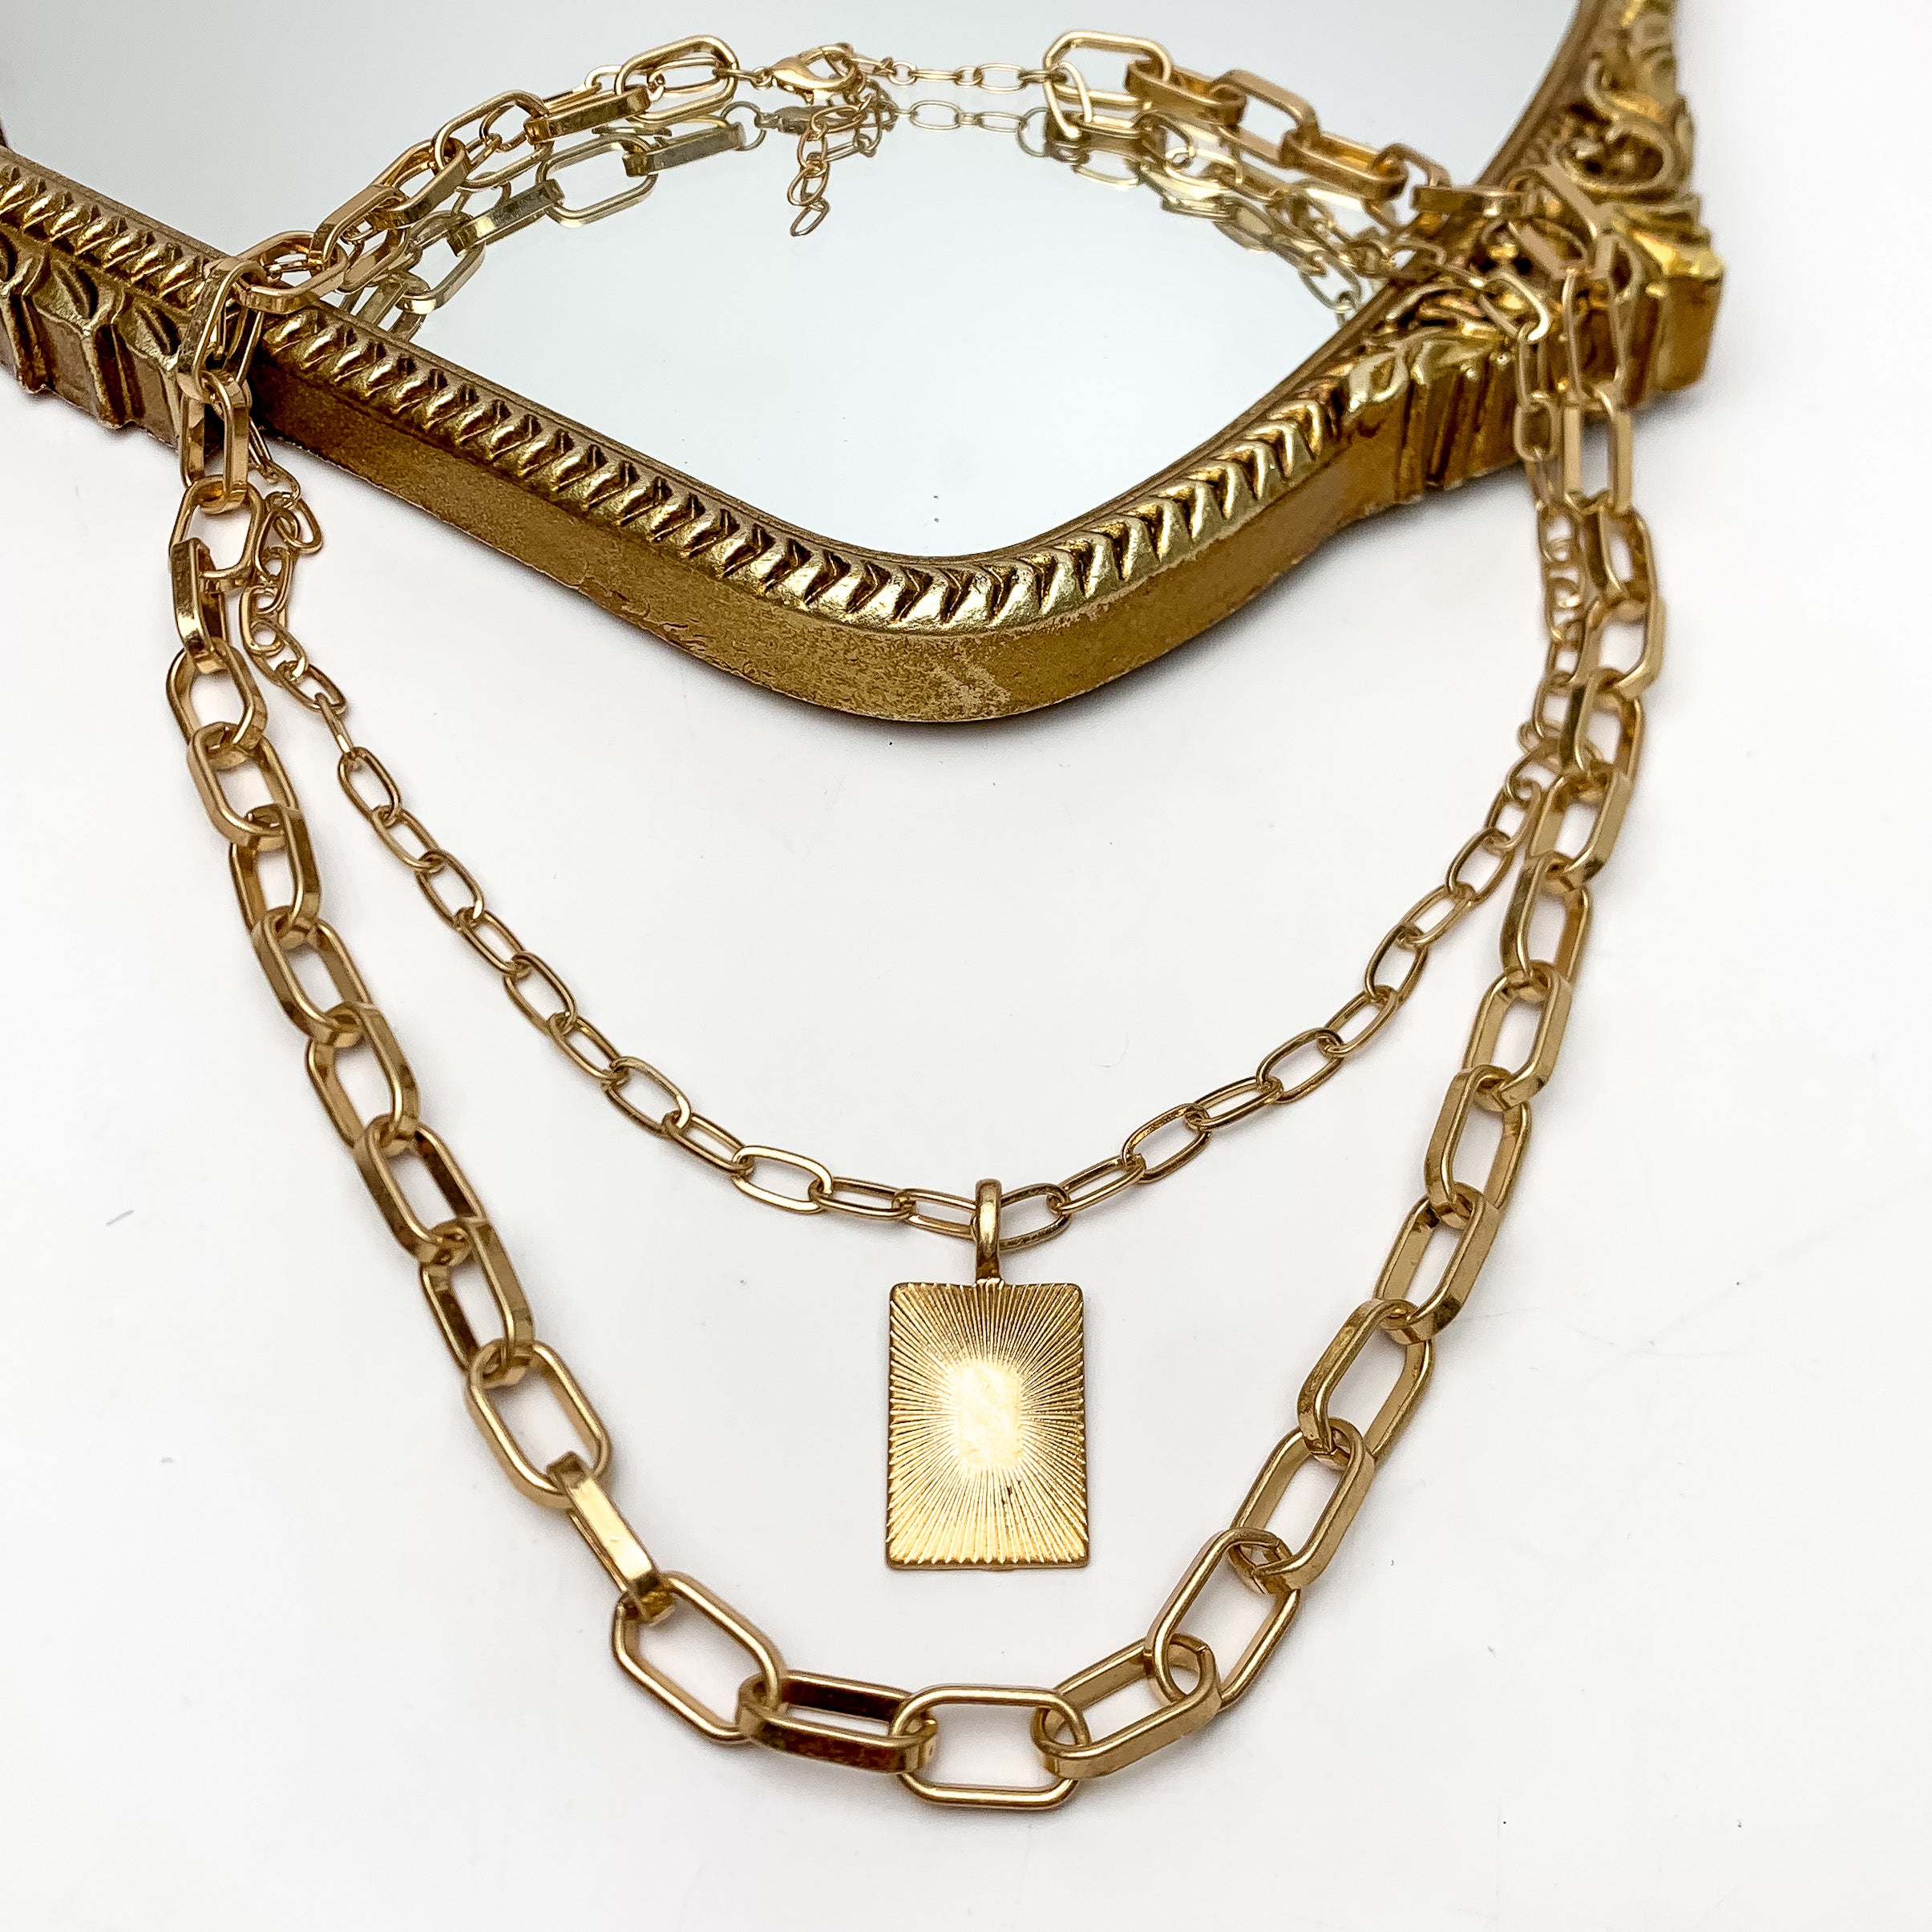 Better Than Ever Multi Strand Gold Tone Chain Necklace. This necklace is pictured on a white background with part of it on a gold trimmed mirror.